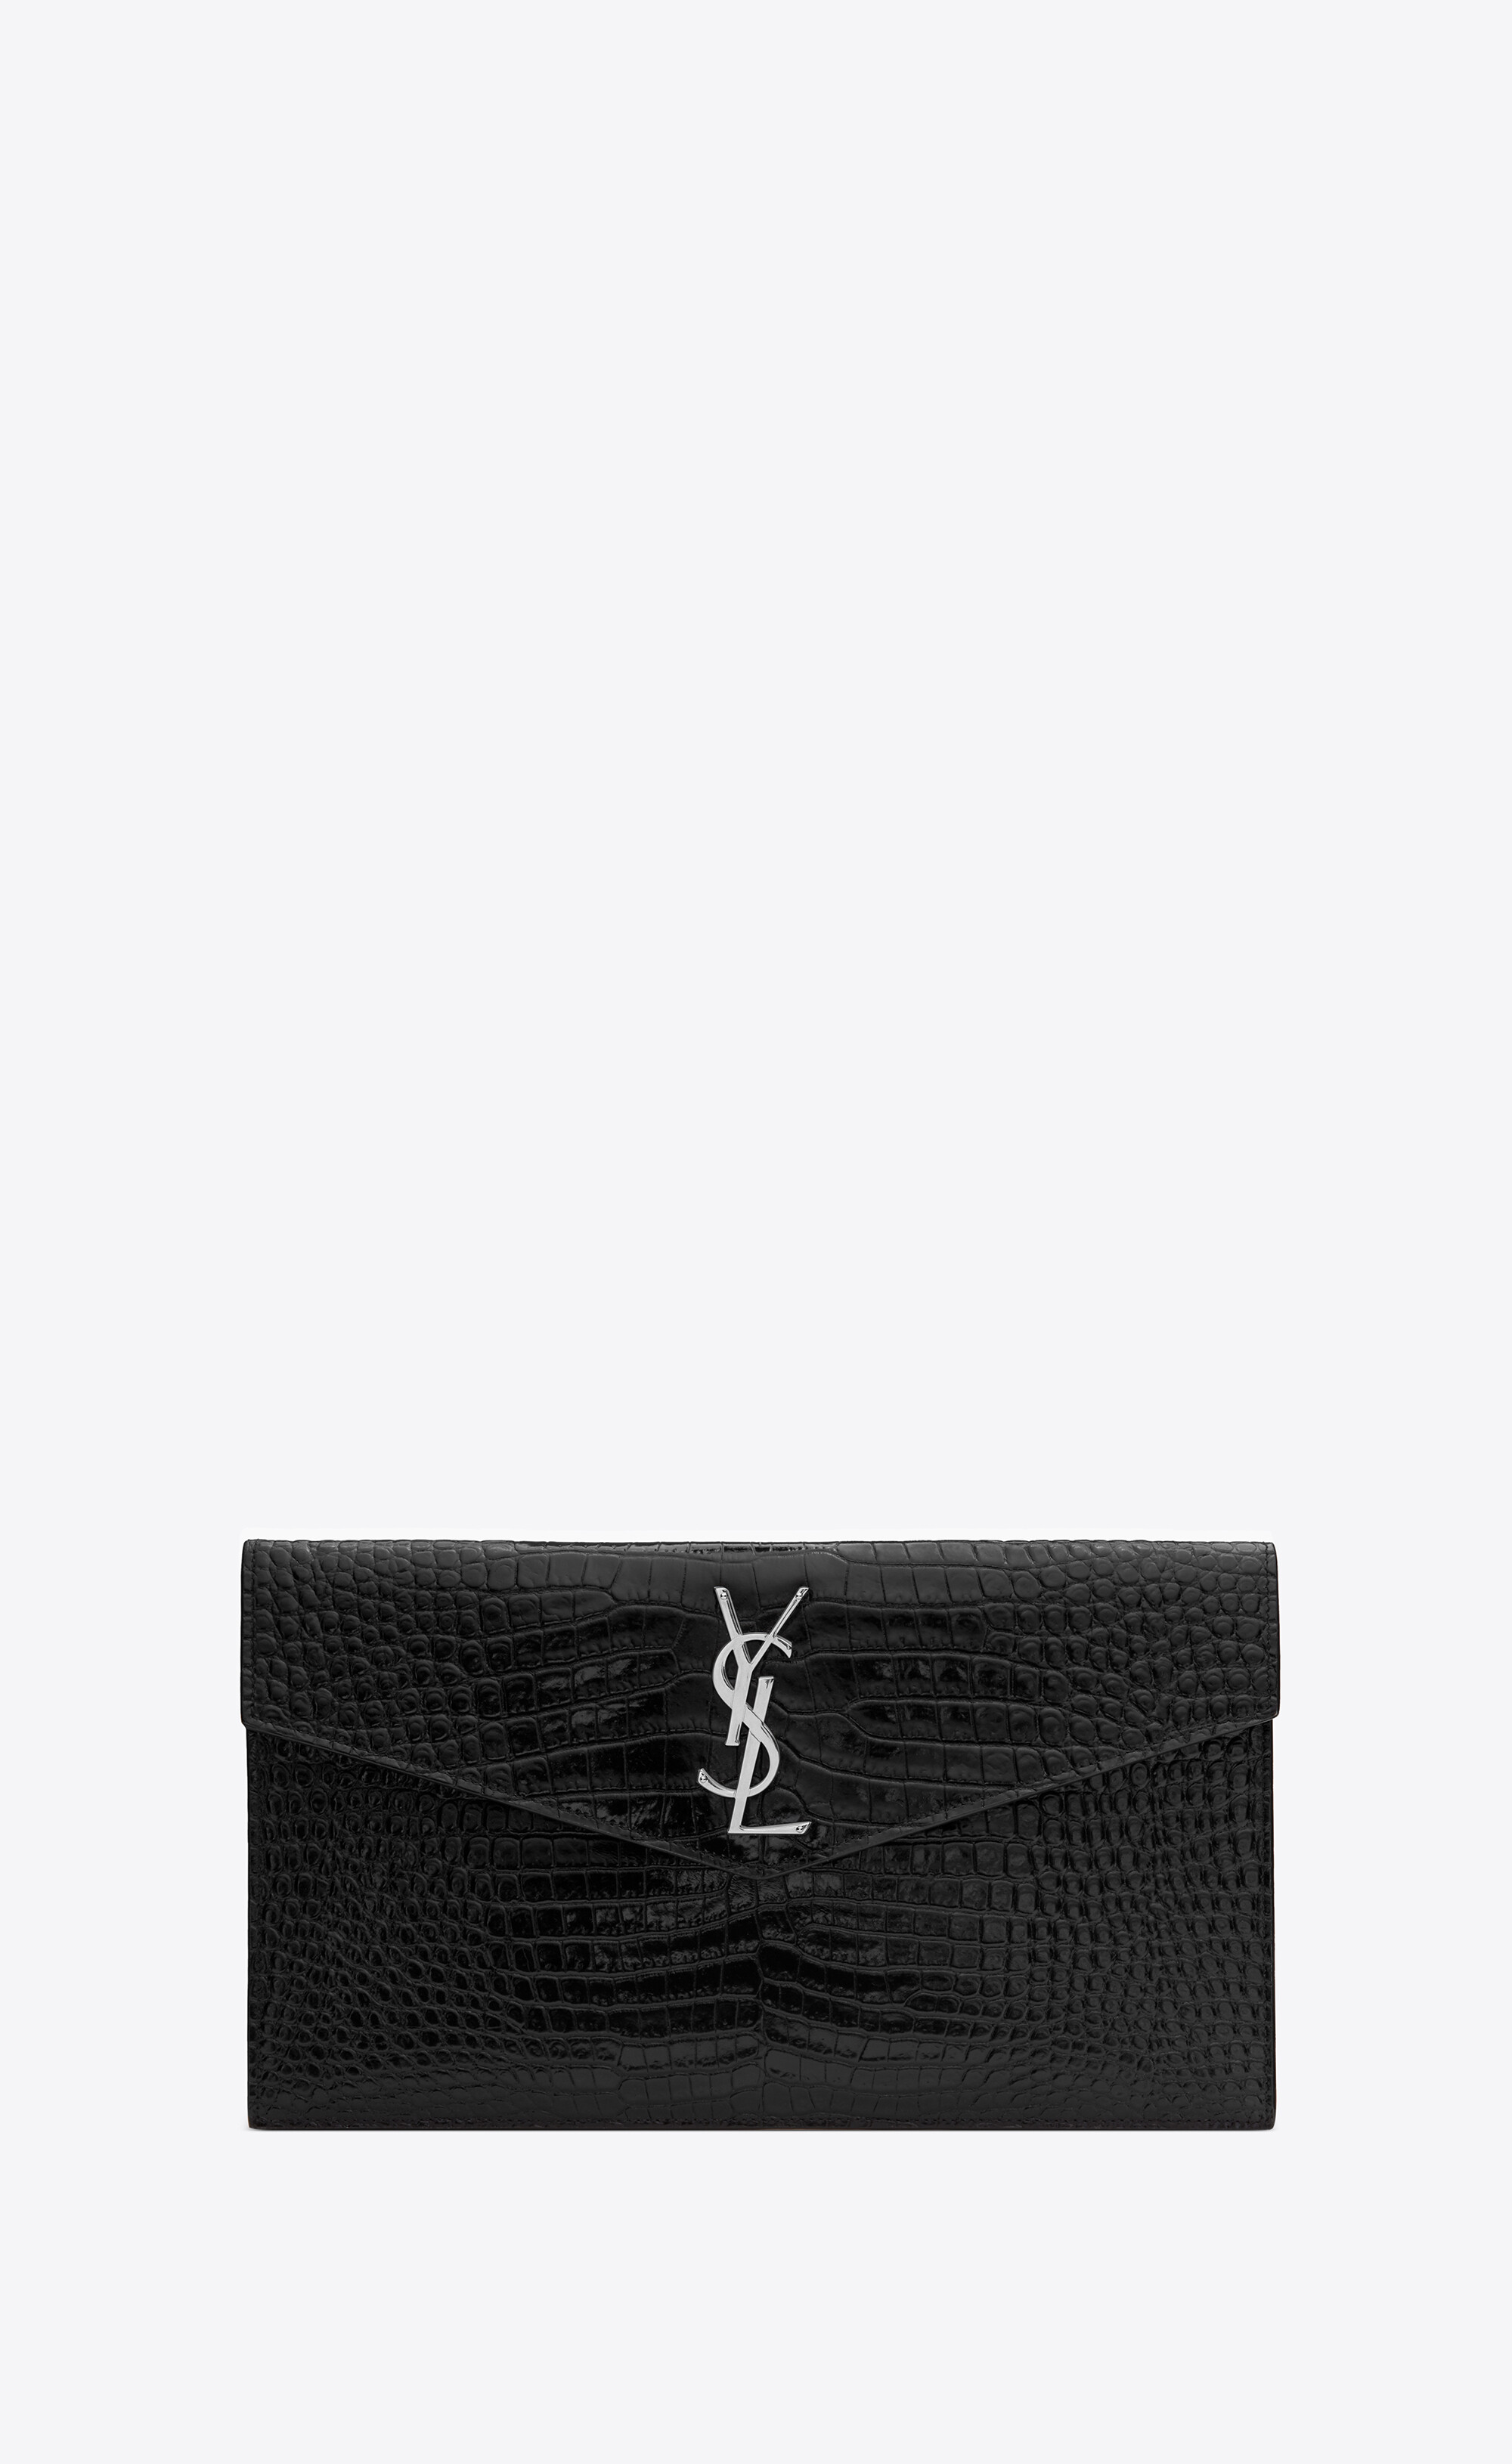 NWOT SAINT LAURENT YSL Clutch Pouch Bag in Dreamy Leather Made in Italy  NWOT